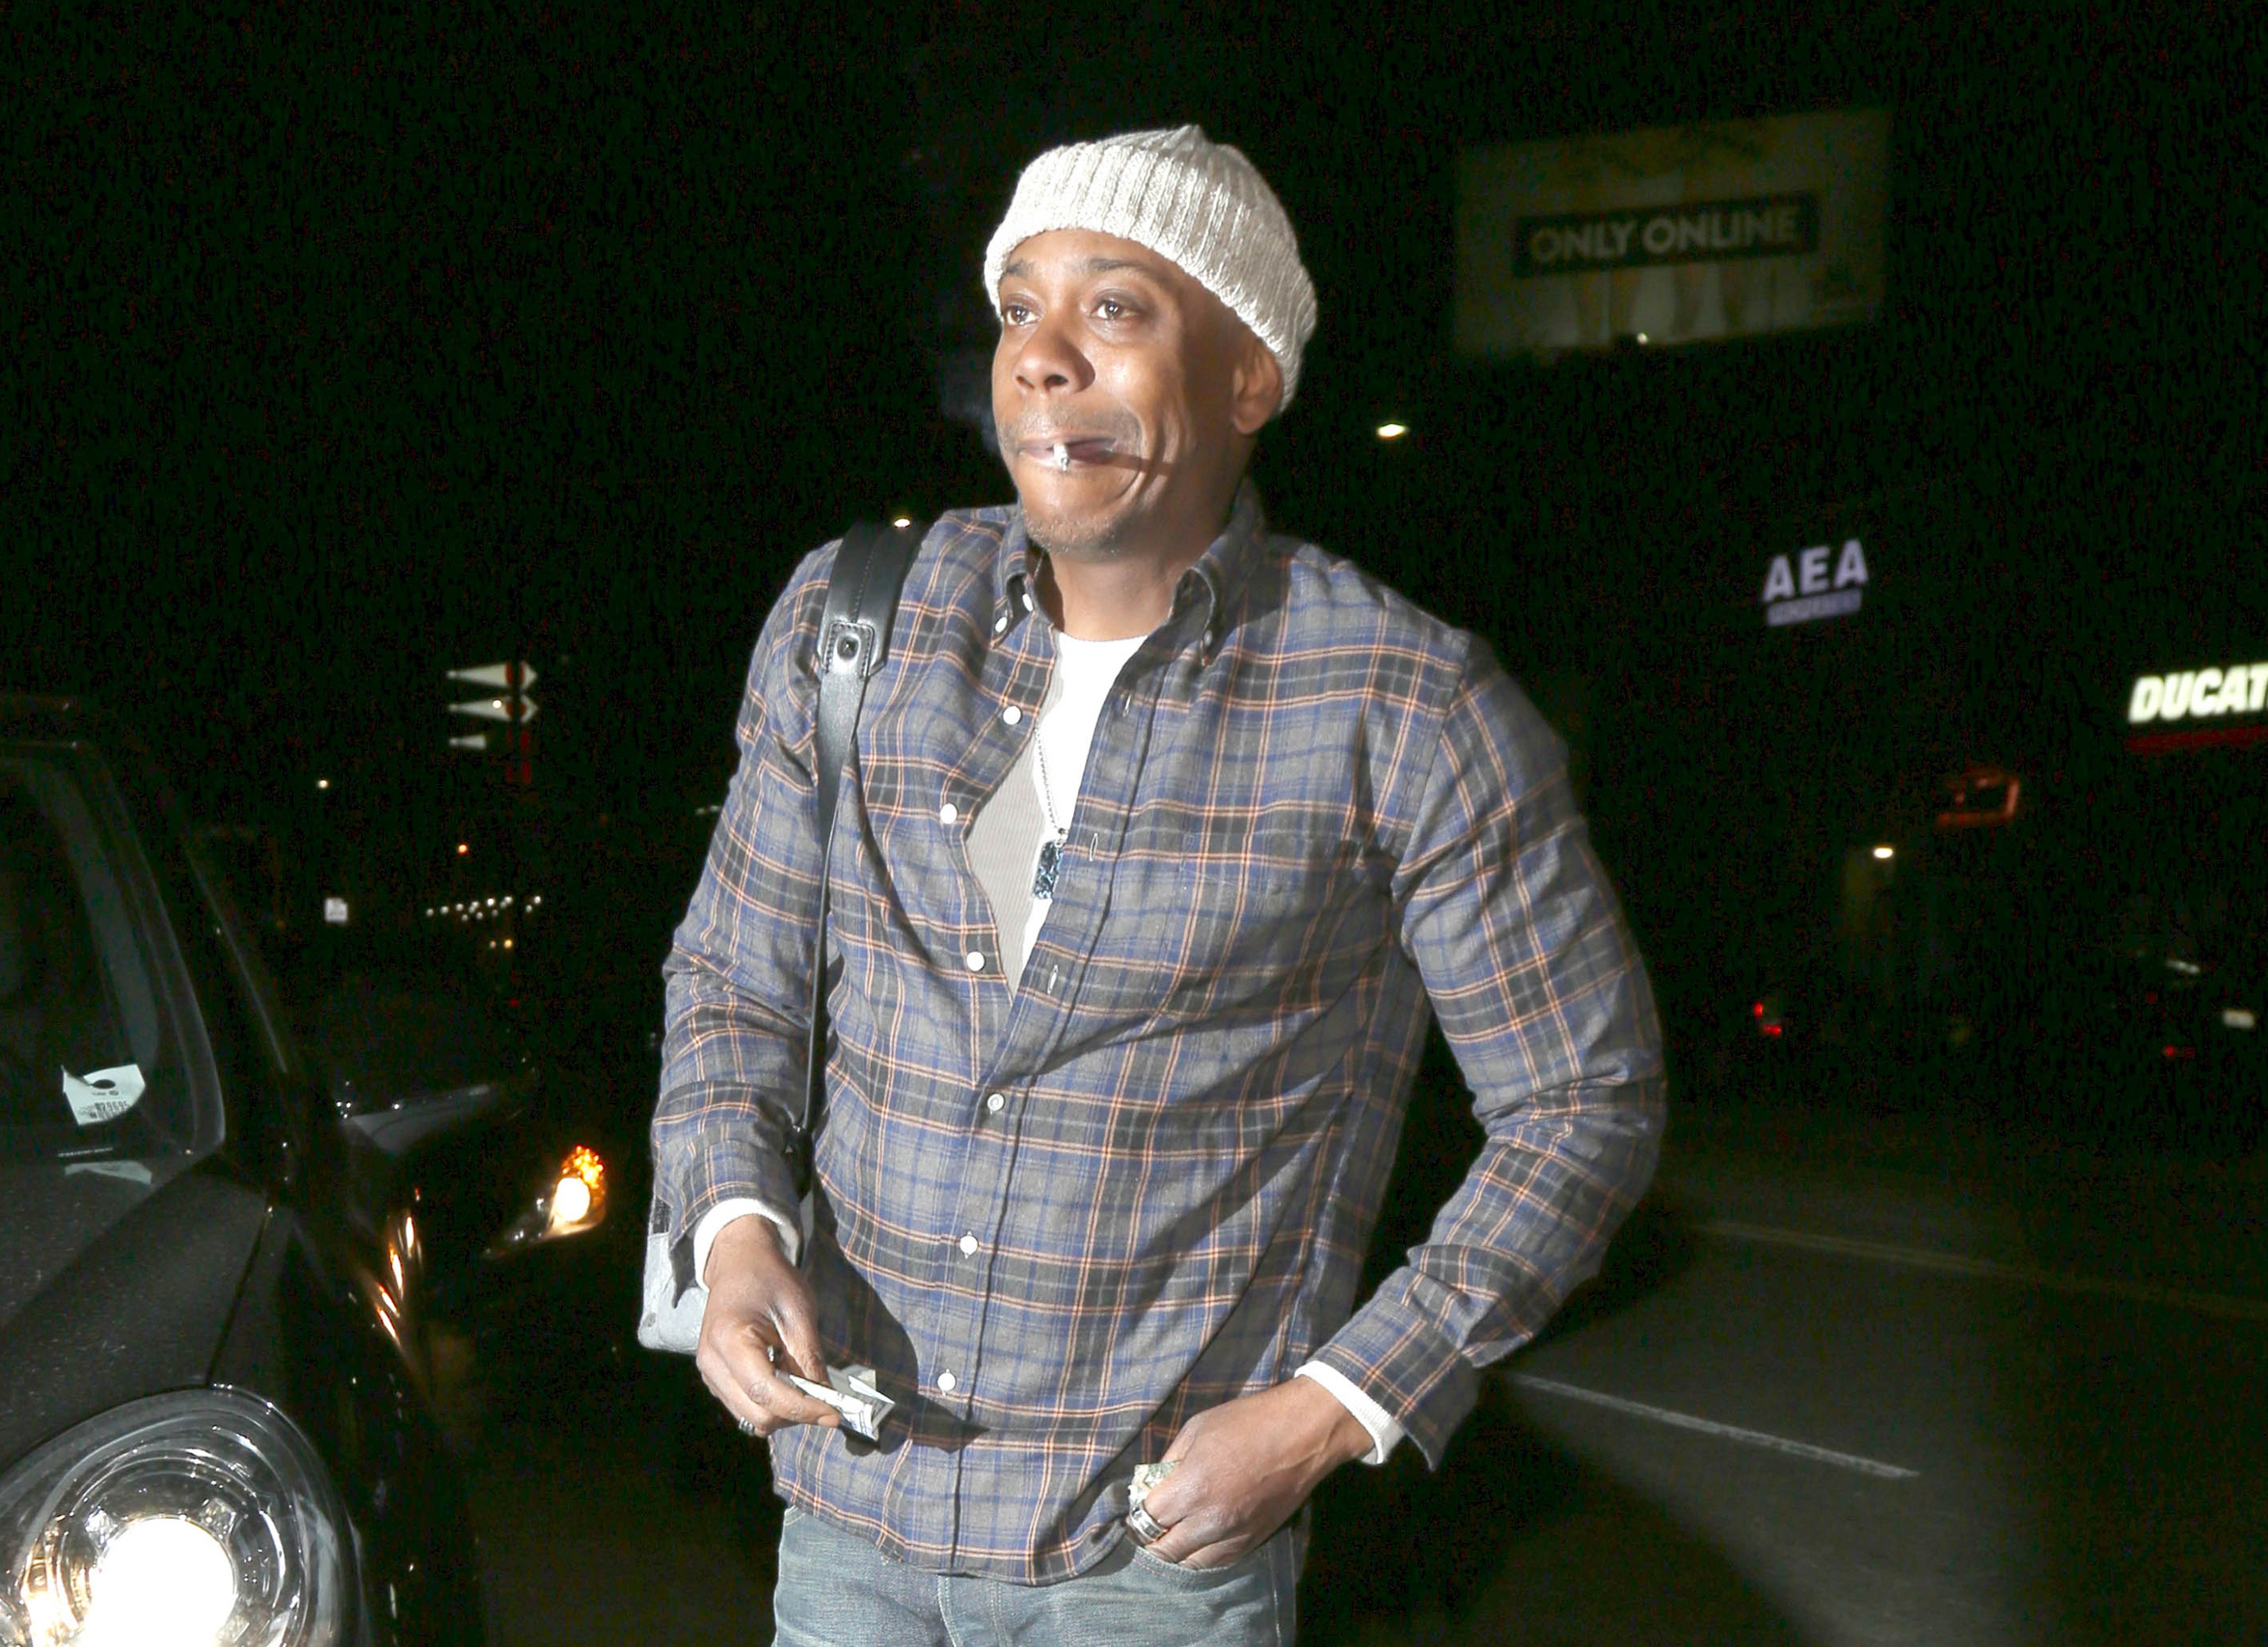 01/11/2016 - Dave Chappelle - Celebrities Sighted Departing Nice Guy Nightclub in Hollywood on January 11, 2016 - Nice Guy Nightclub - Hollywood, CA, USA - Keywords: Vertical, Portrait, Photography, Candid on the Street, Arts Culture and Entertainment, Celebrities, Person, People, Celebrity Sightings, City Of Los Angeles, California Orientation: Portrait Face Count: 1 - False - Photo Credit: jmx / PRPhotos.com - Contact (1-866-551-7827) - Portrait Face Count: 1